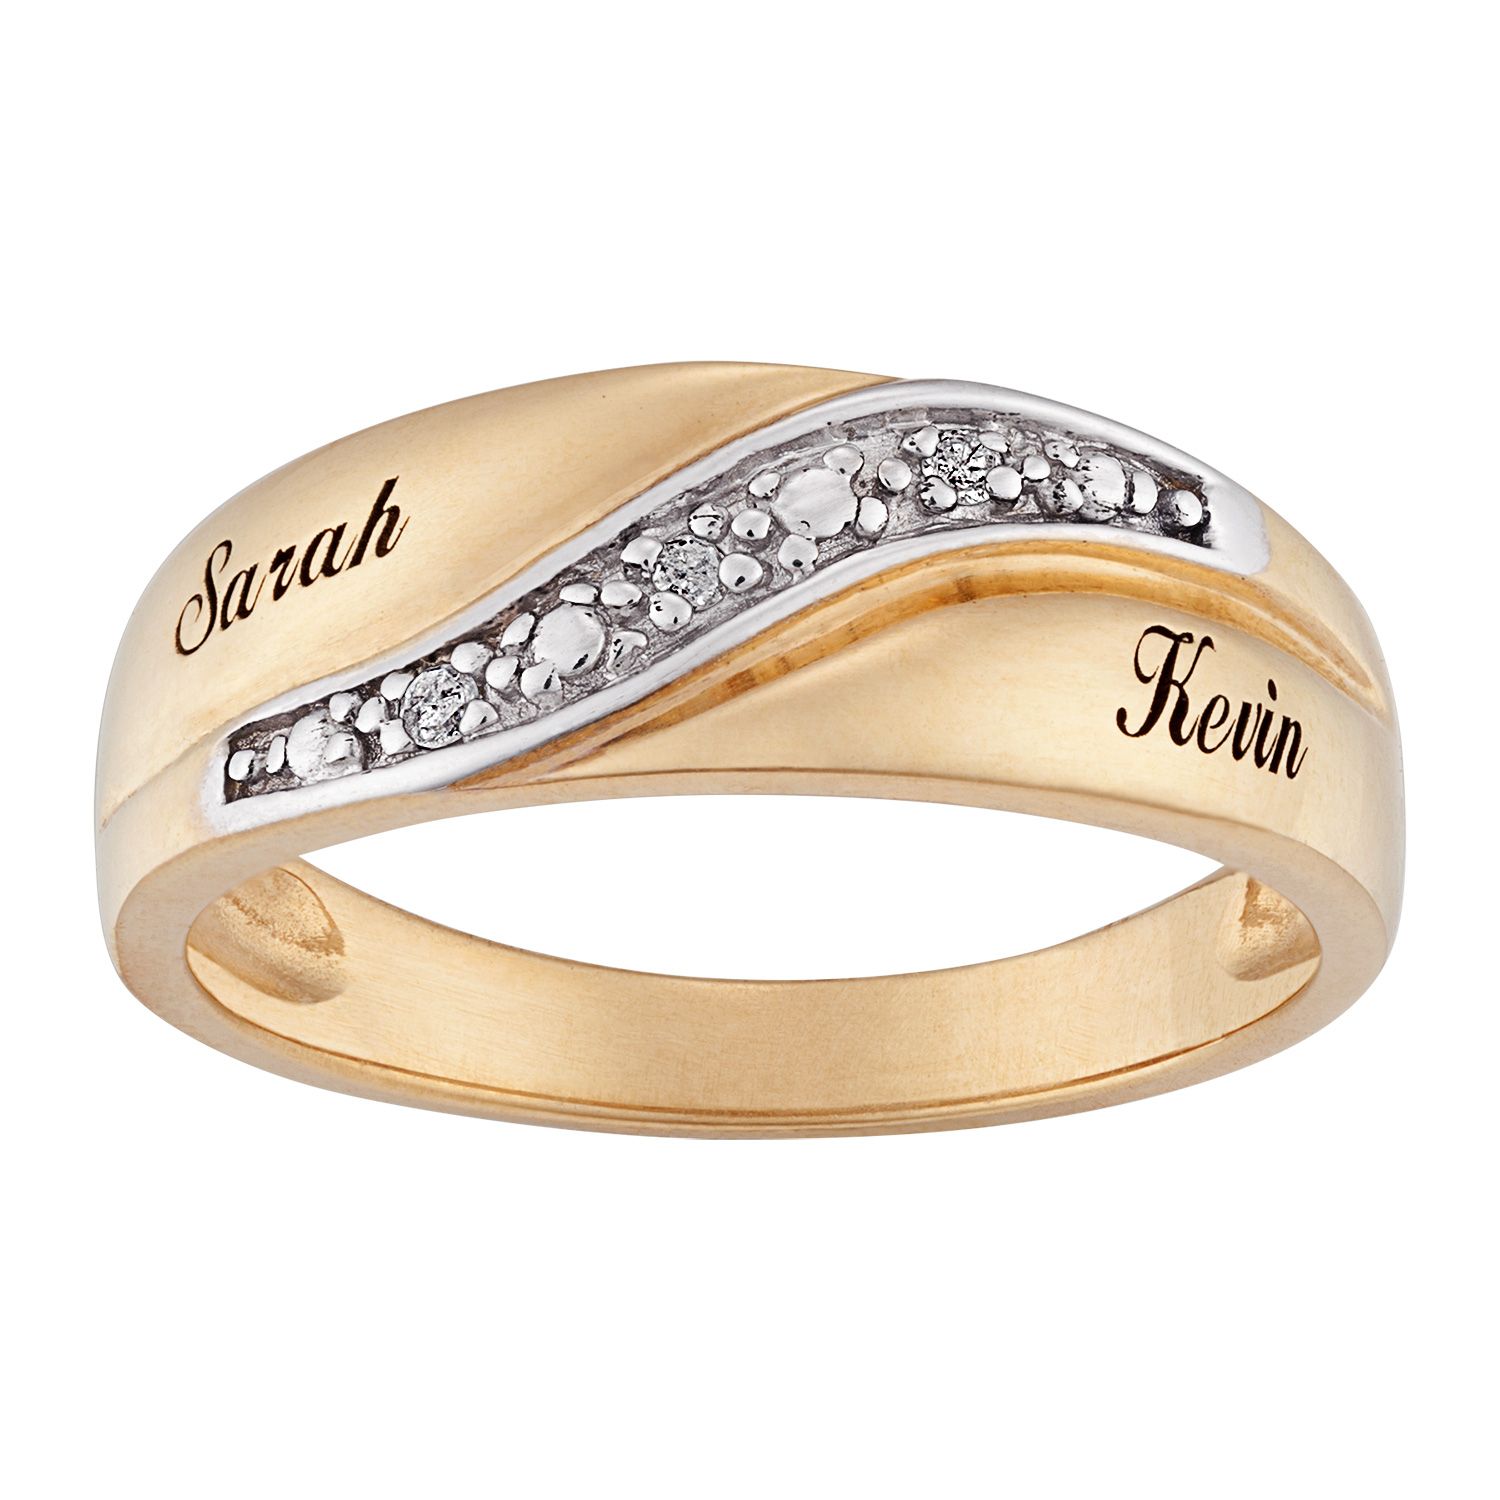 Men's Diamond Accent Wedding Band In Sterling Silver With 18k Gold Plate (2  Names)|gordon's Jewelers Throughout Best And Newest Diamond Accent Anniversary Bands In Sterling Silver (View 8 of 25)